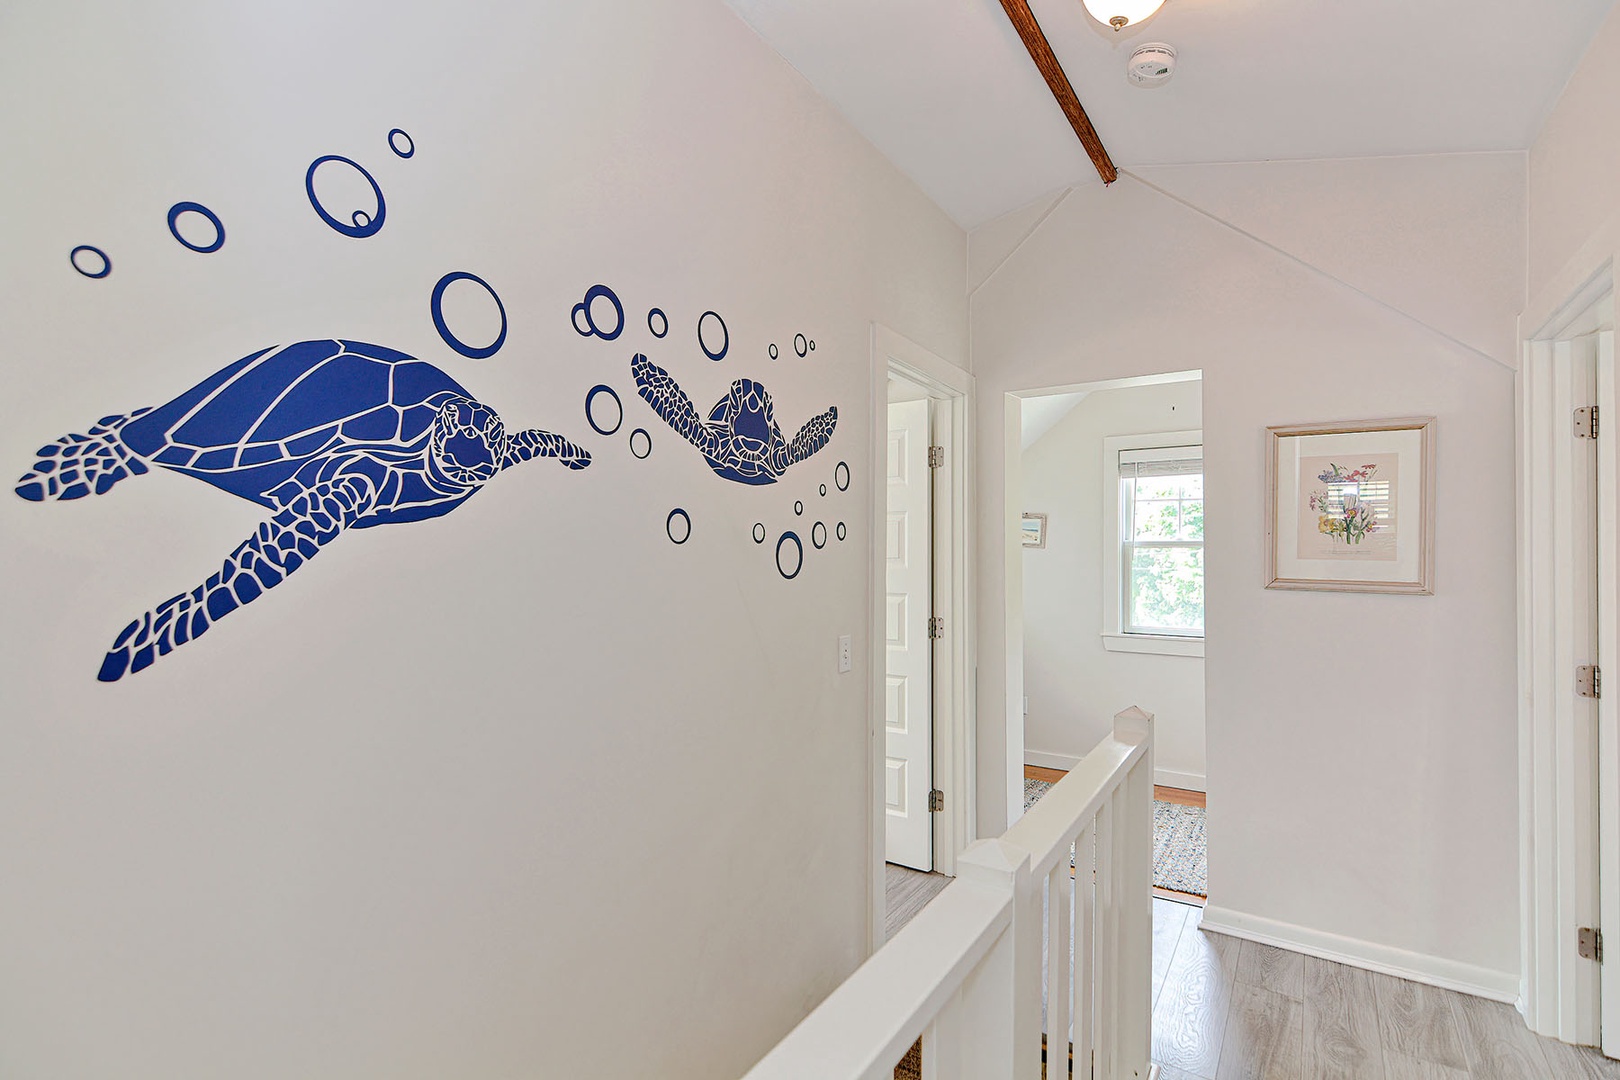 A fun sea-themed mural overseeing the upstairs landing.